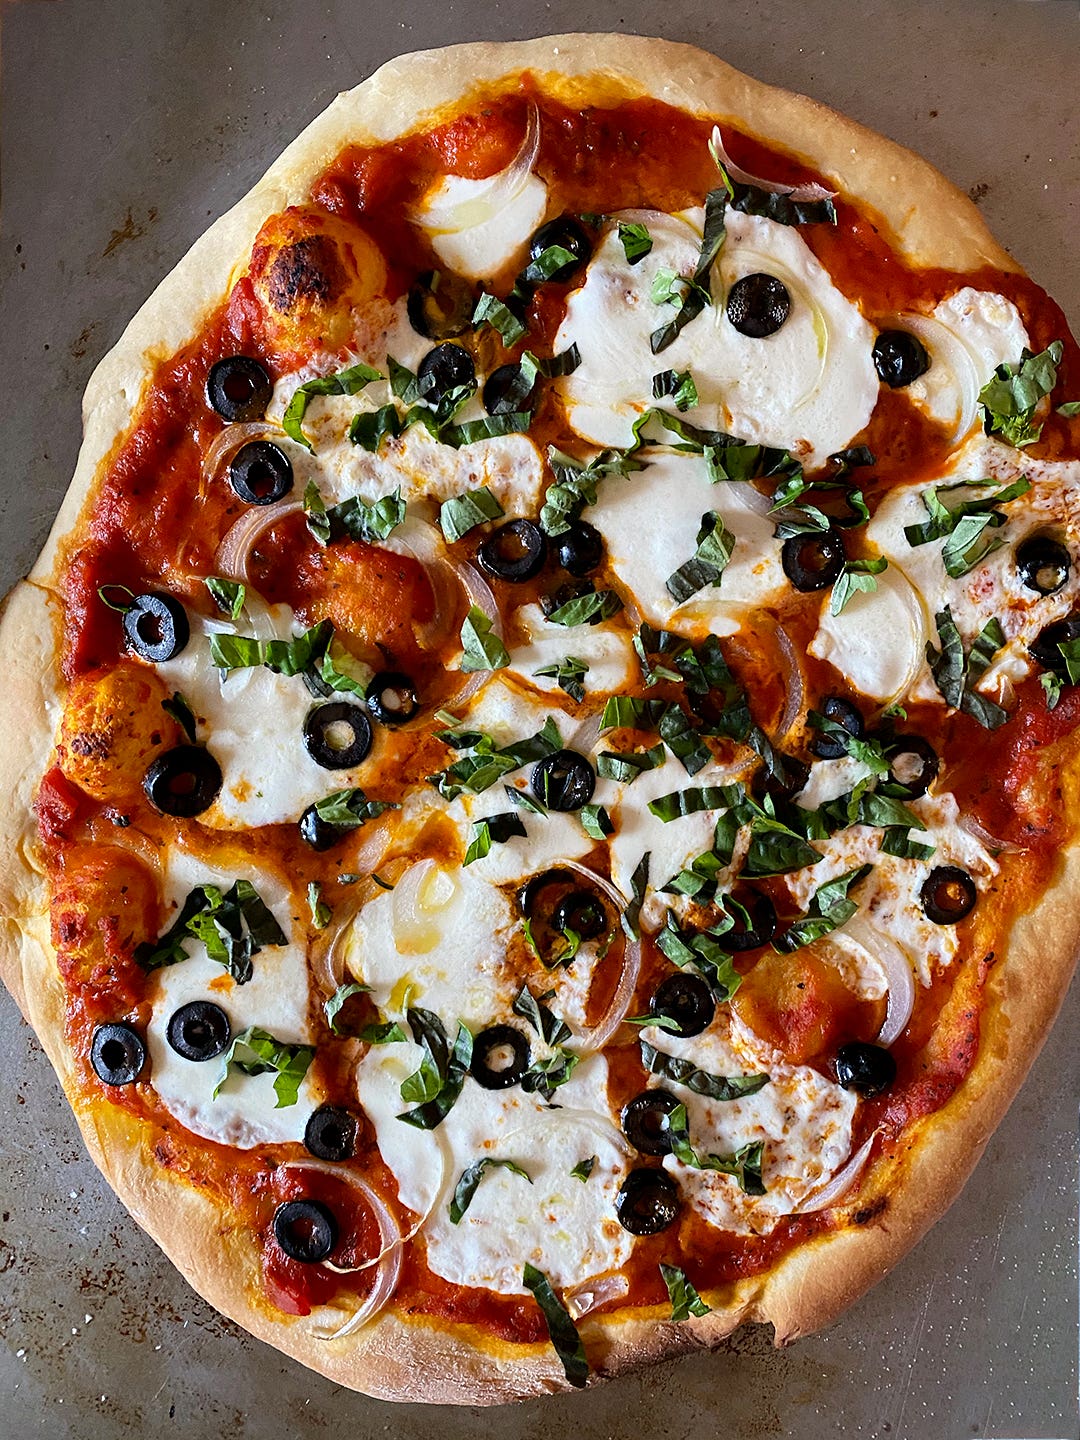 Run Out of Things to Do With Your Kids? Make Homemade Pizza